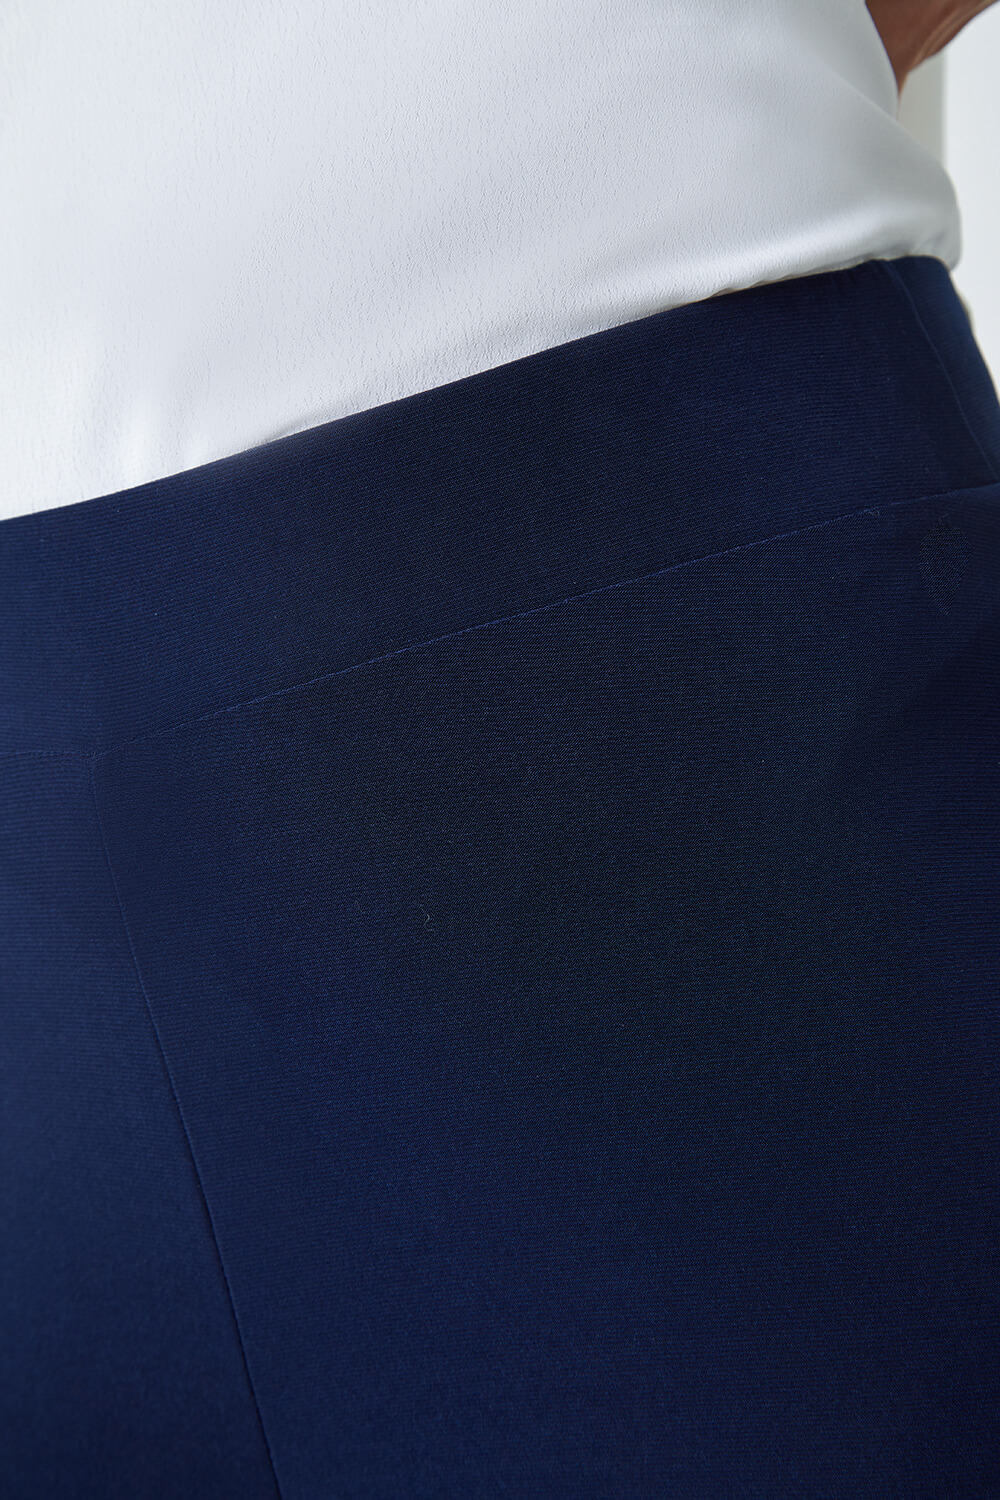 Navy  Super Wide Leg Stretch Trouser, Image 5 of 5